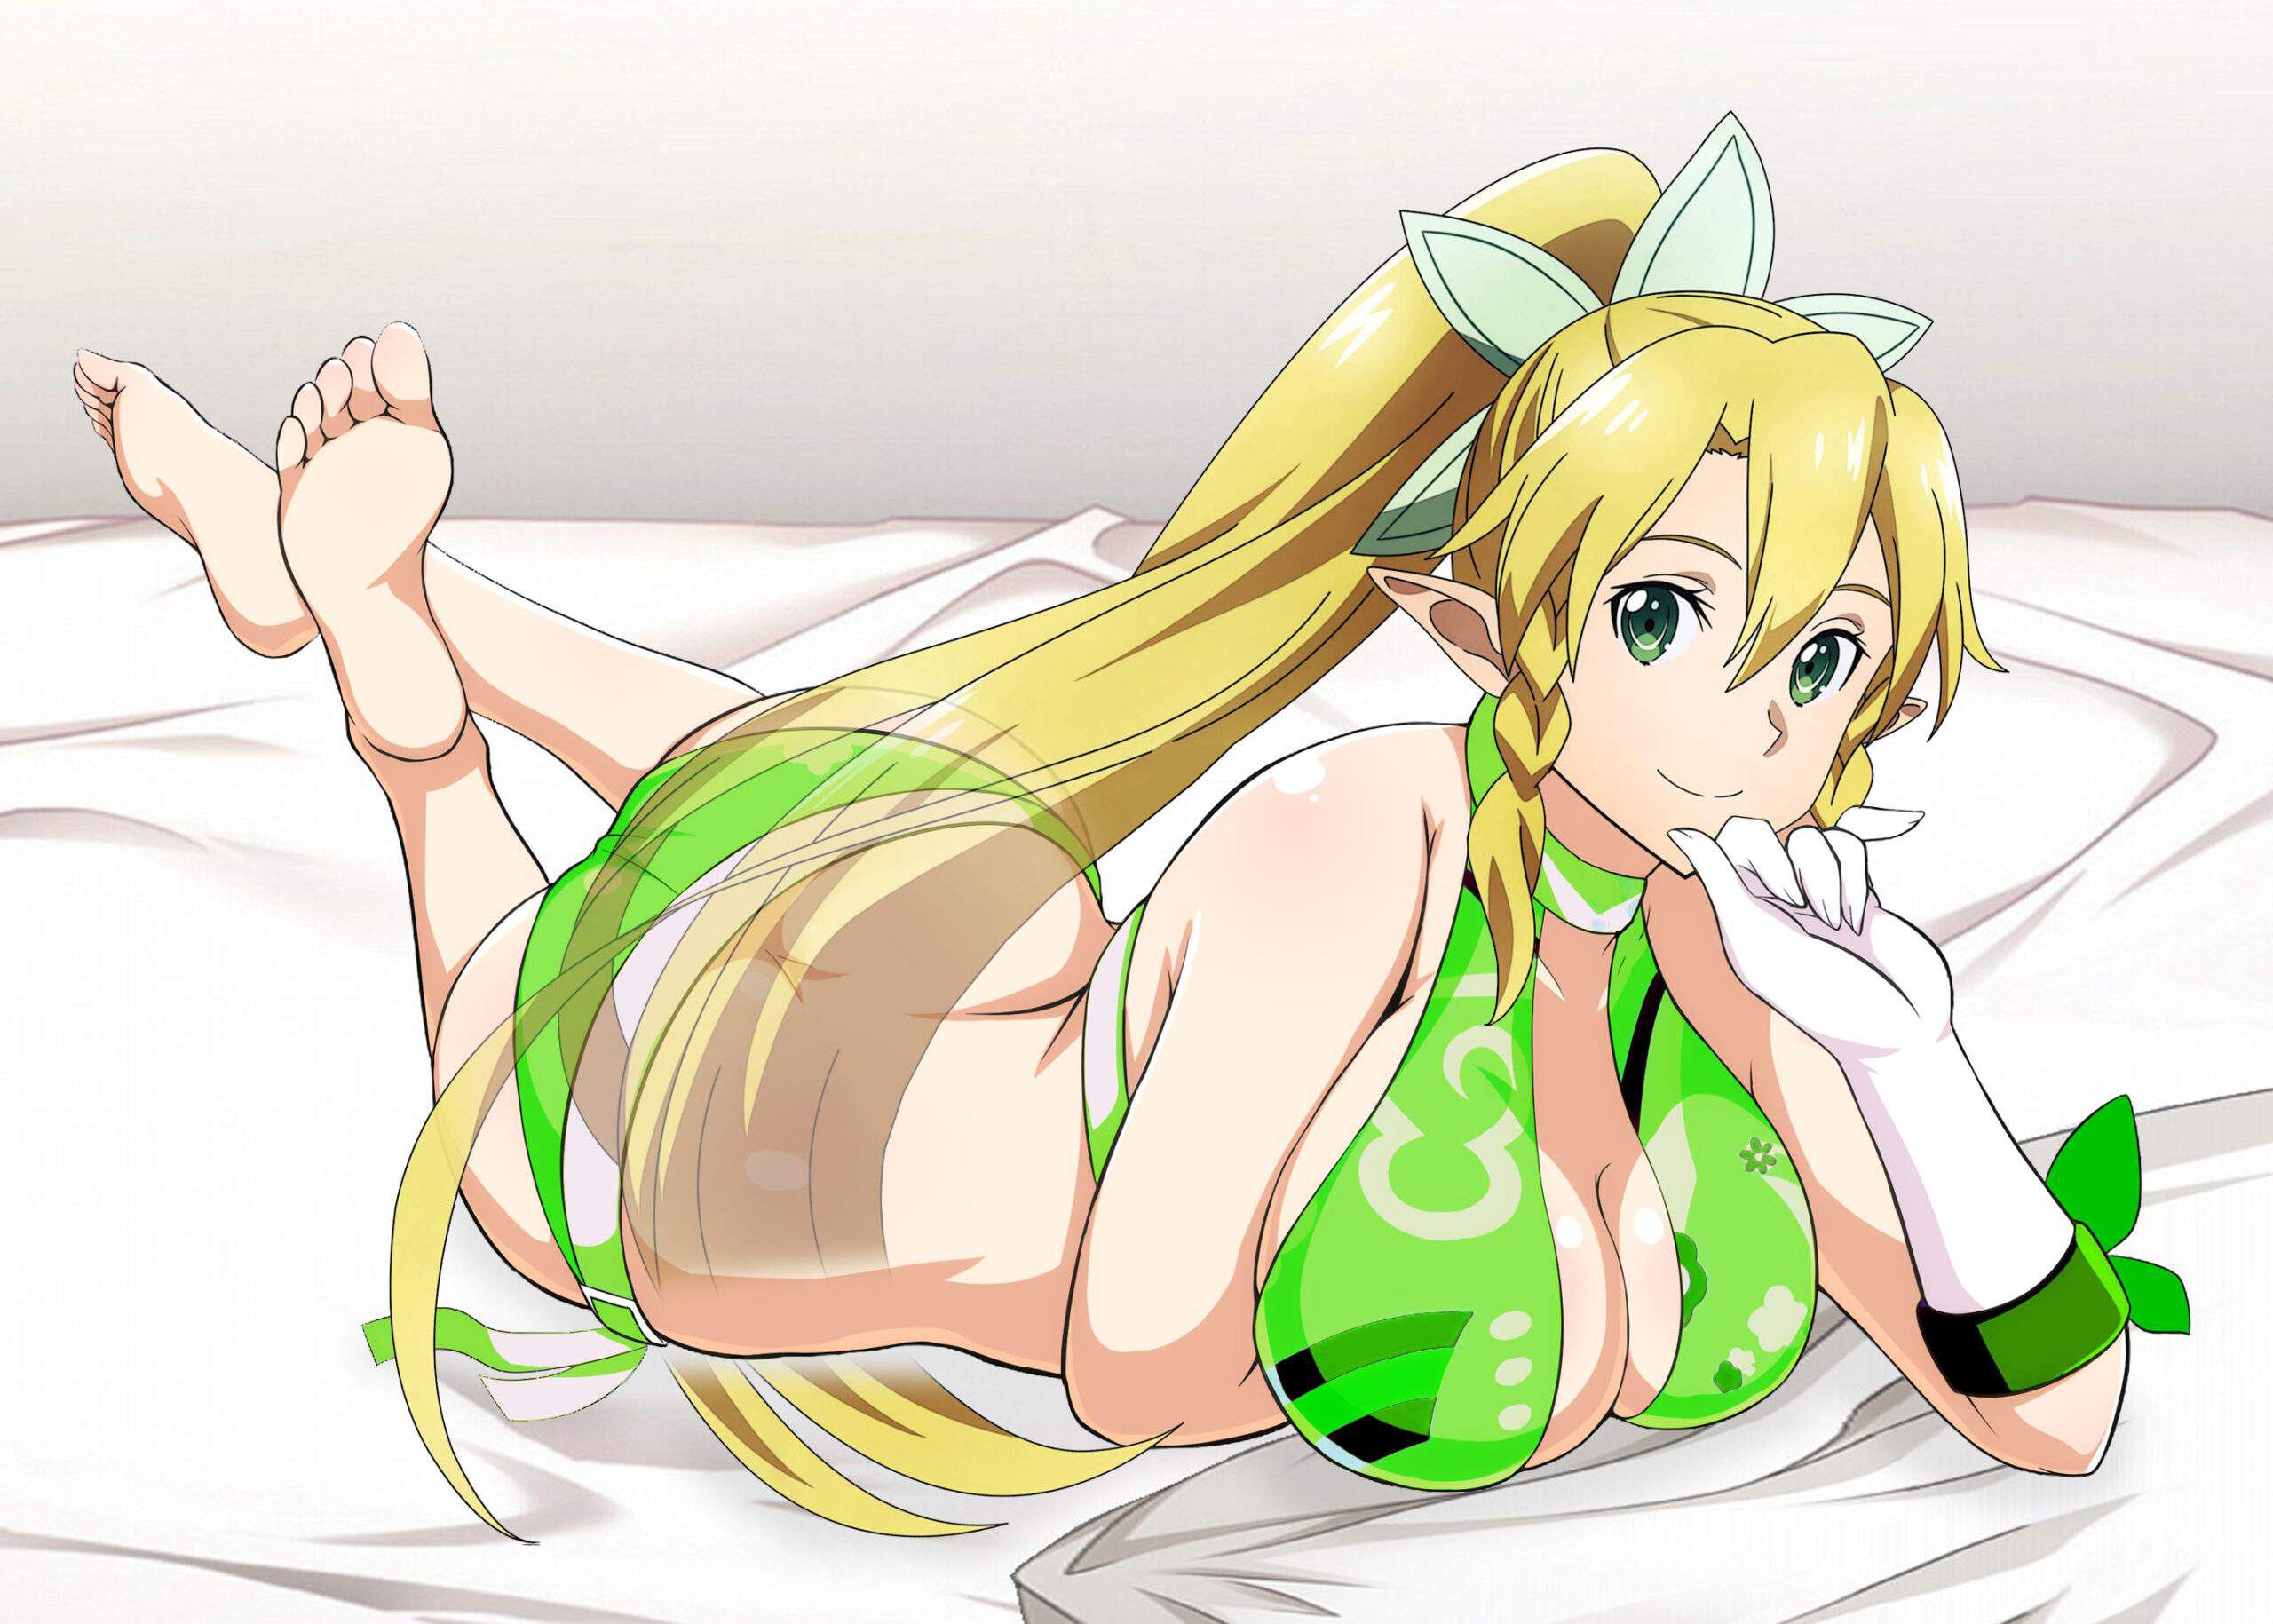 [Sword Art Online (SAO)] Erotic images such as Asuna-chan 74th 31